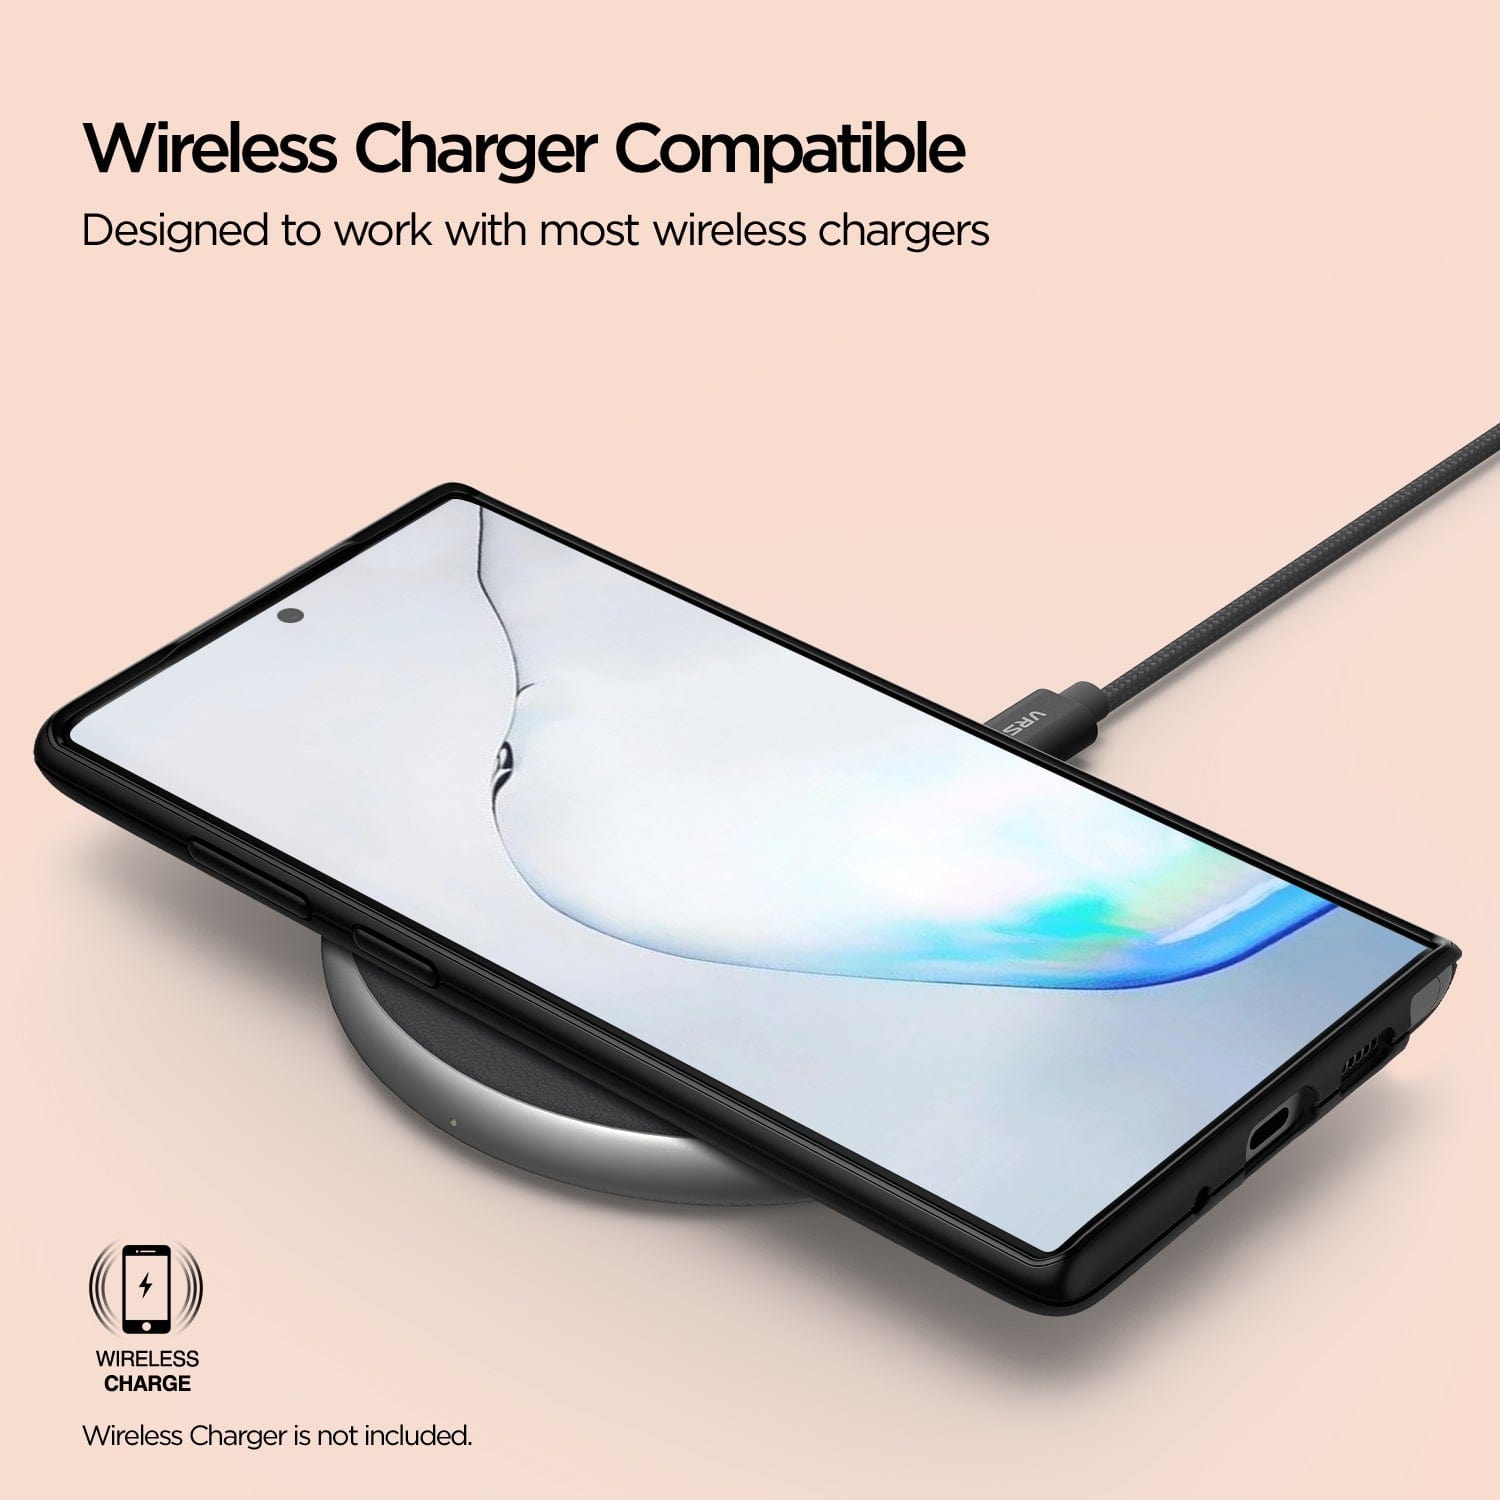 The Galaxy Note 10 Plus case is specifically crafted to be compatible with the majority of wireless chargers, ensuring seamless functionality.